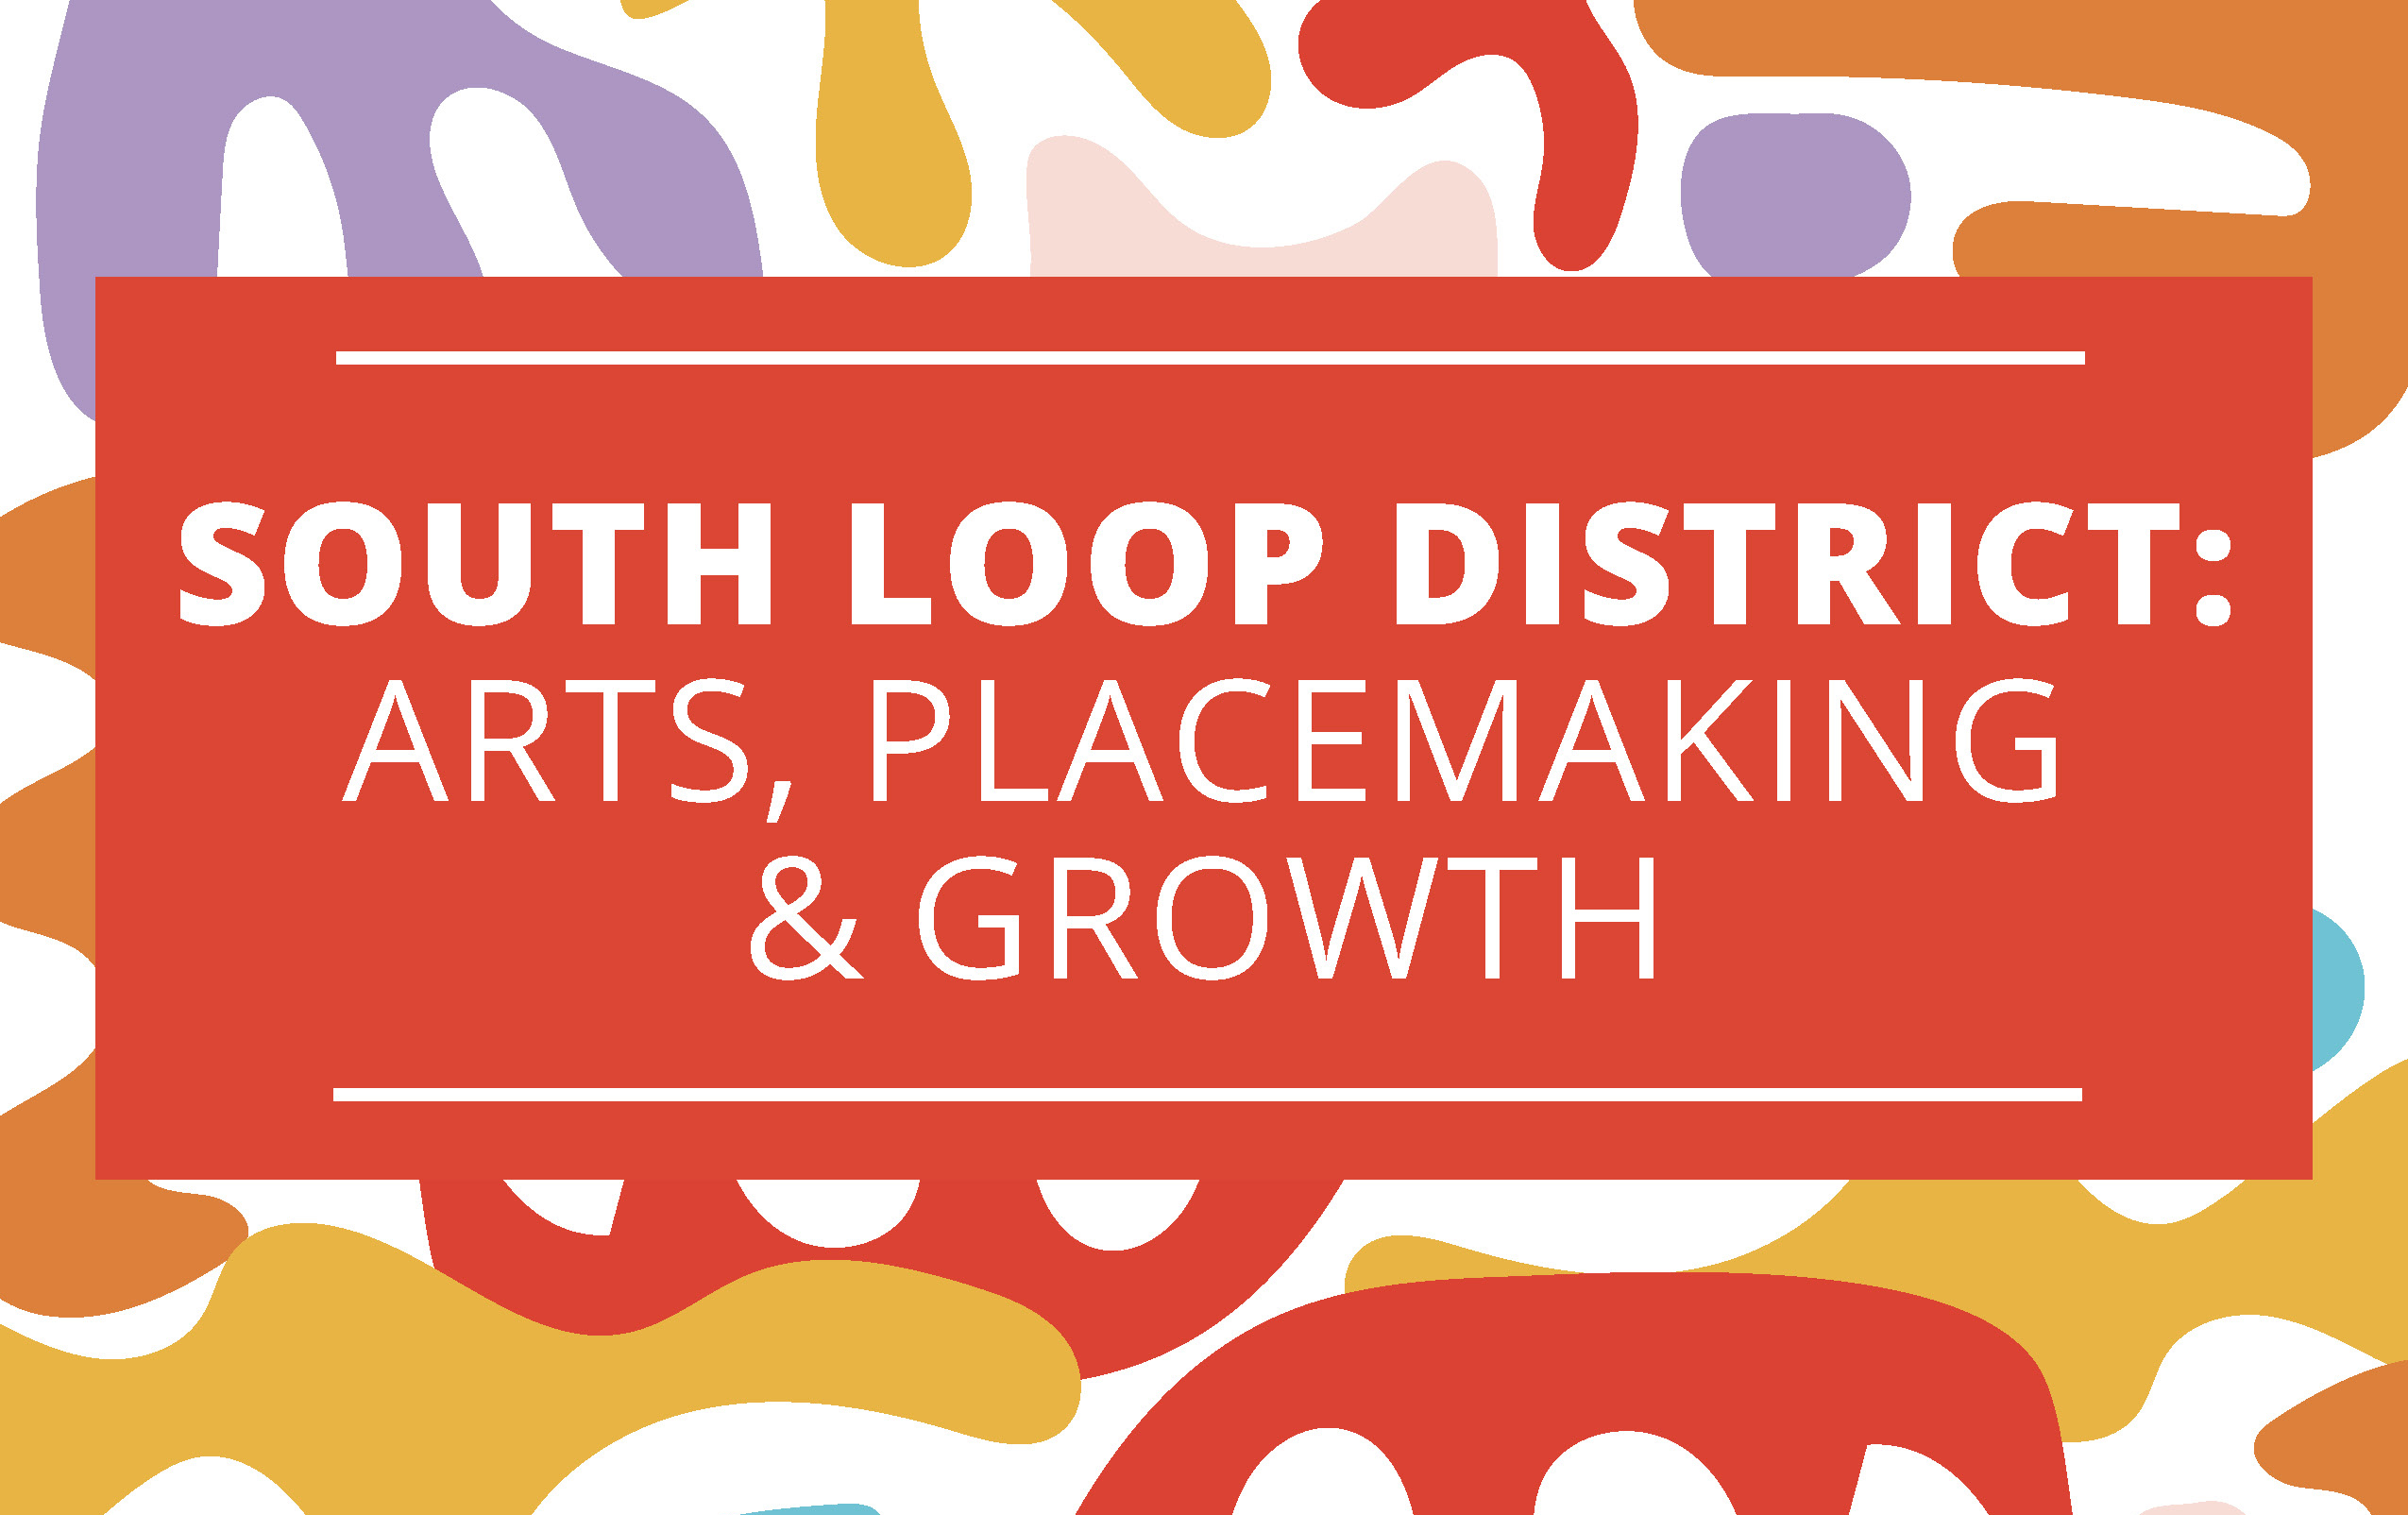 South Loop District: Arts, Placement and Growth